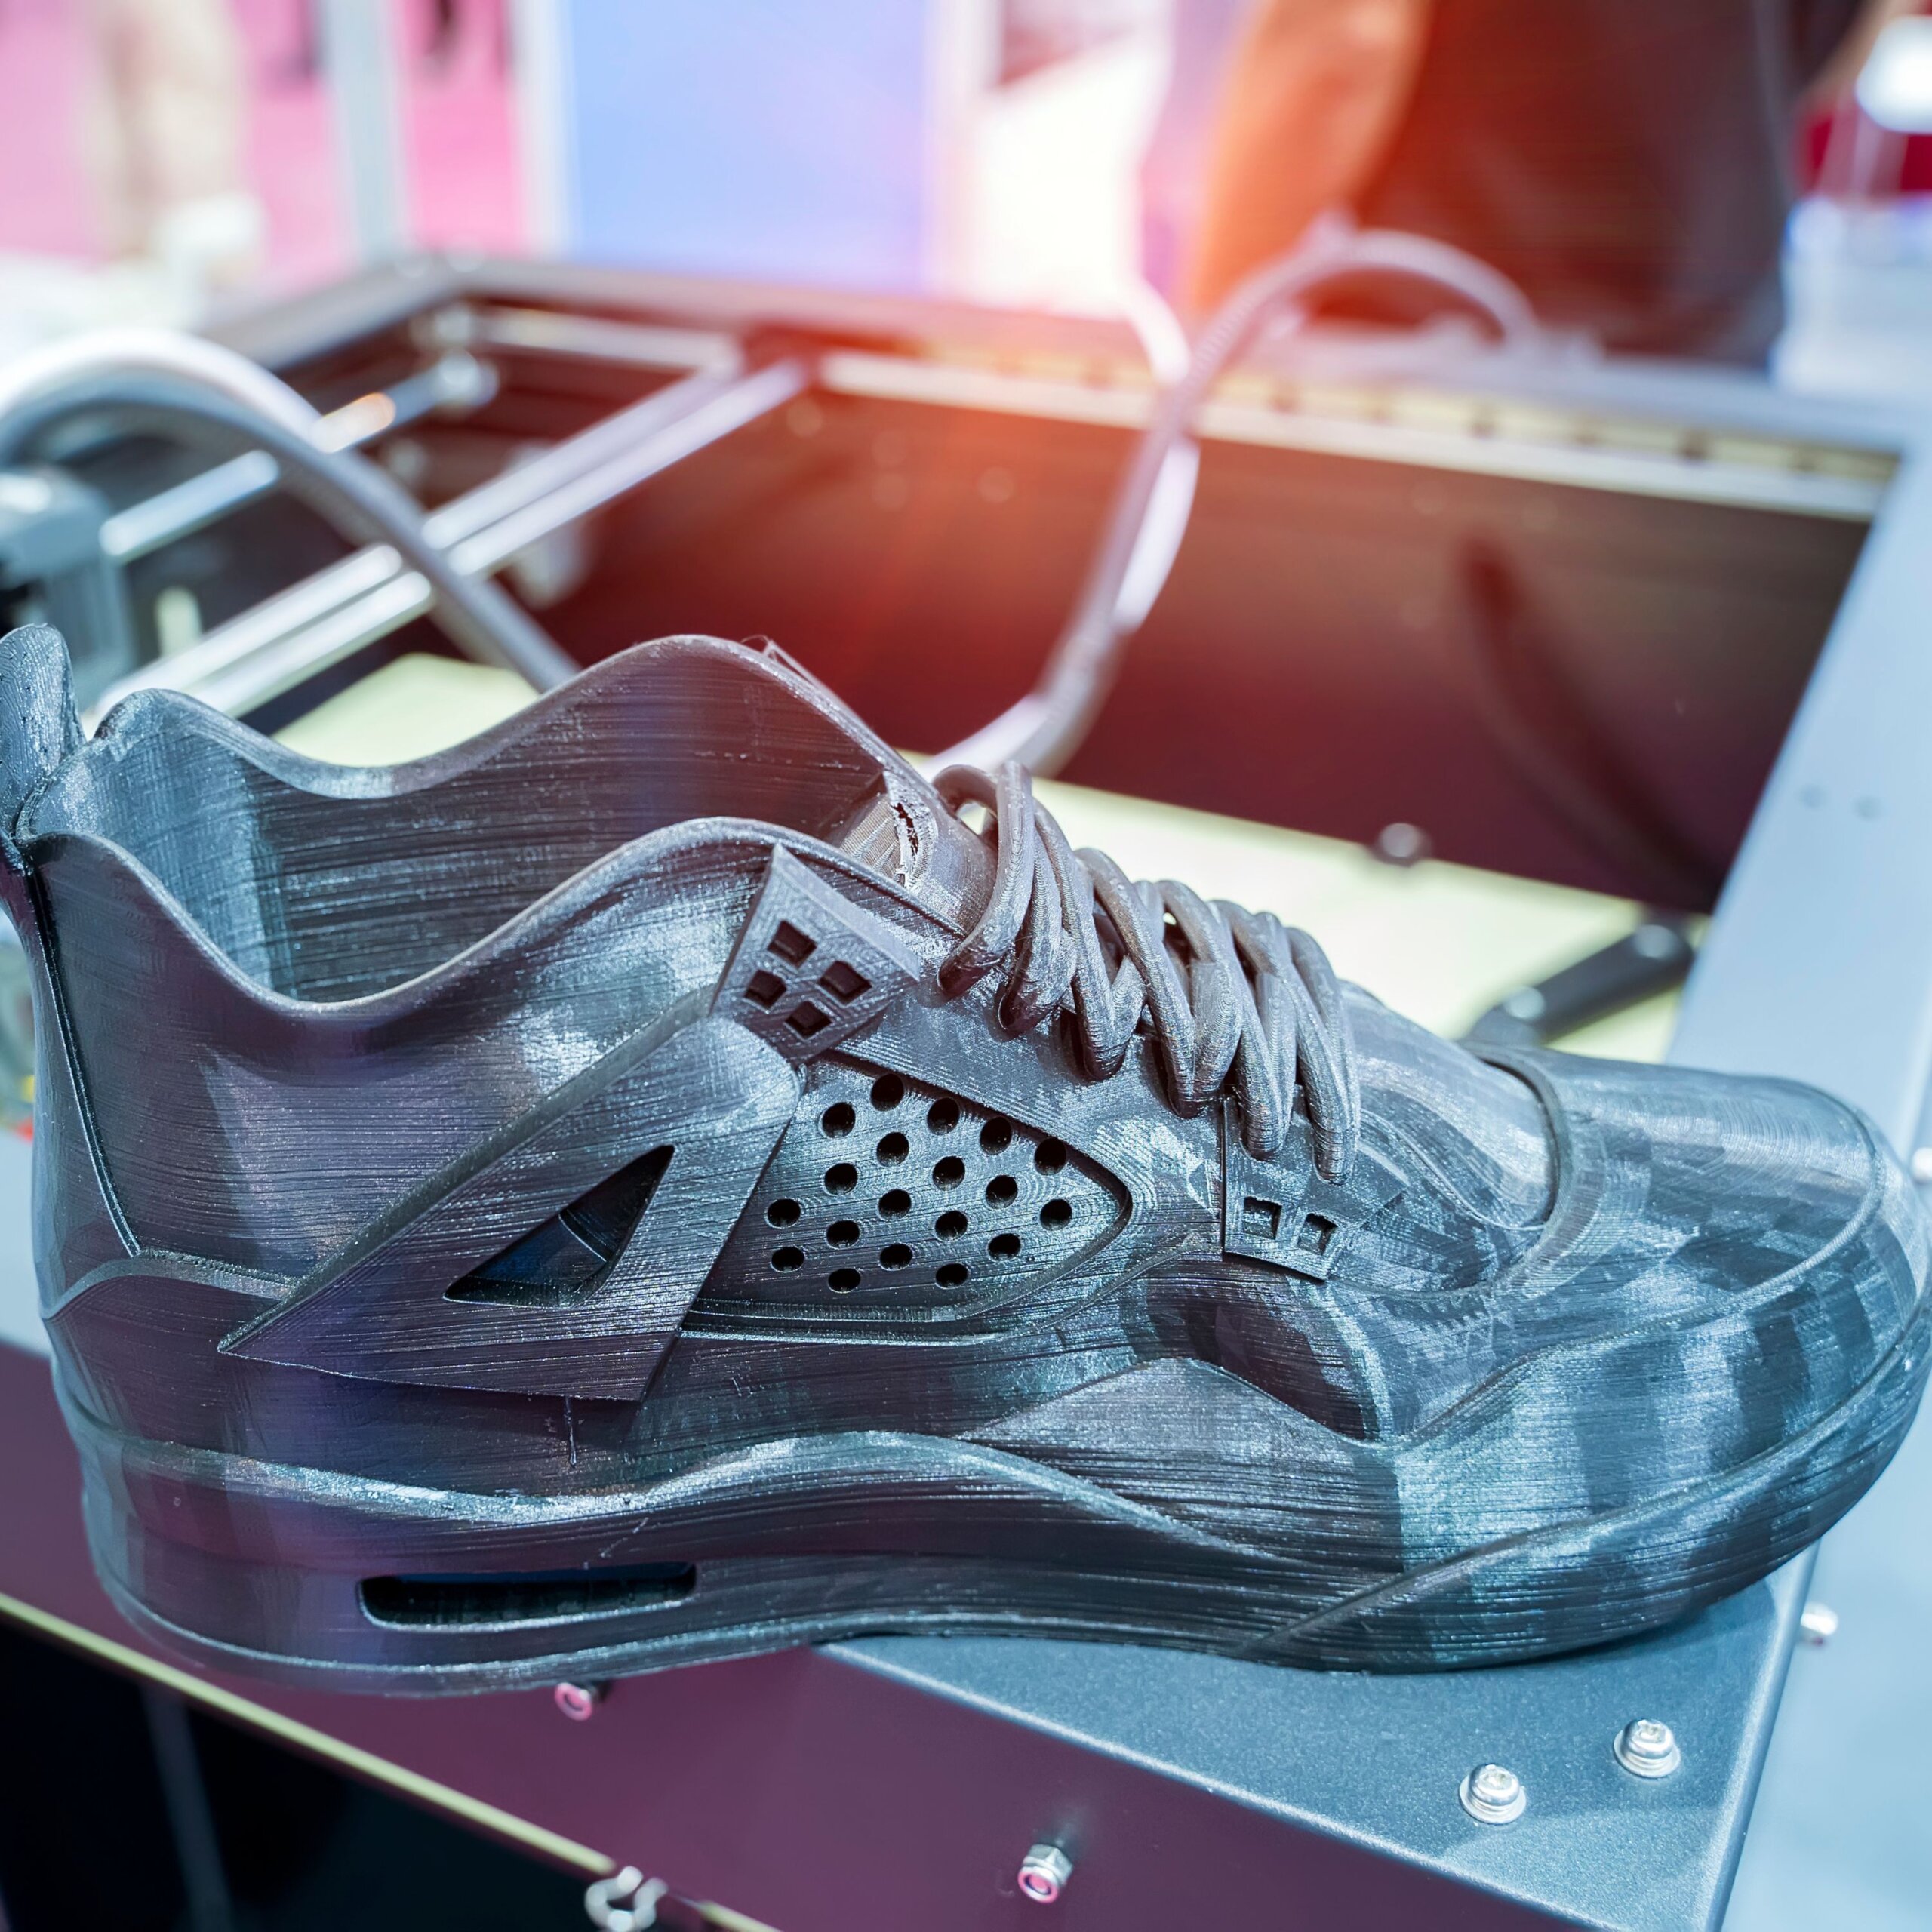 How 3D Printing Can Help Your Sneaker Business